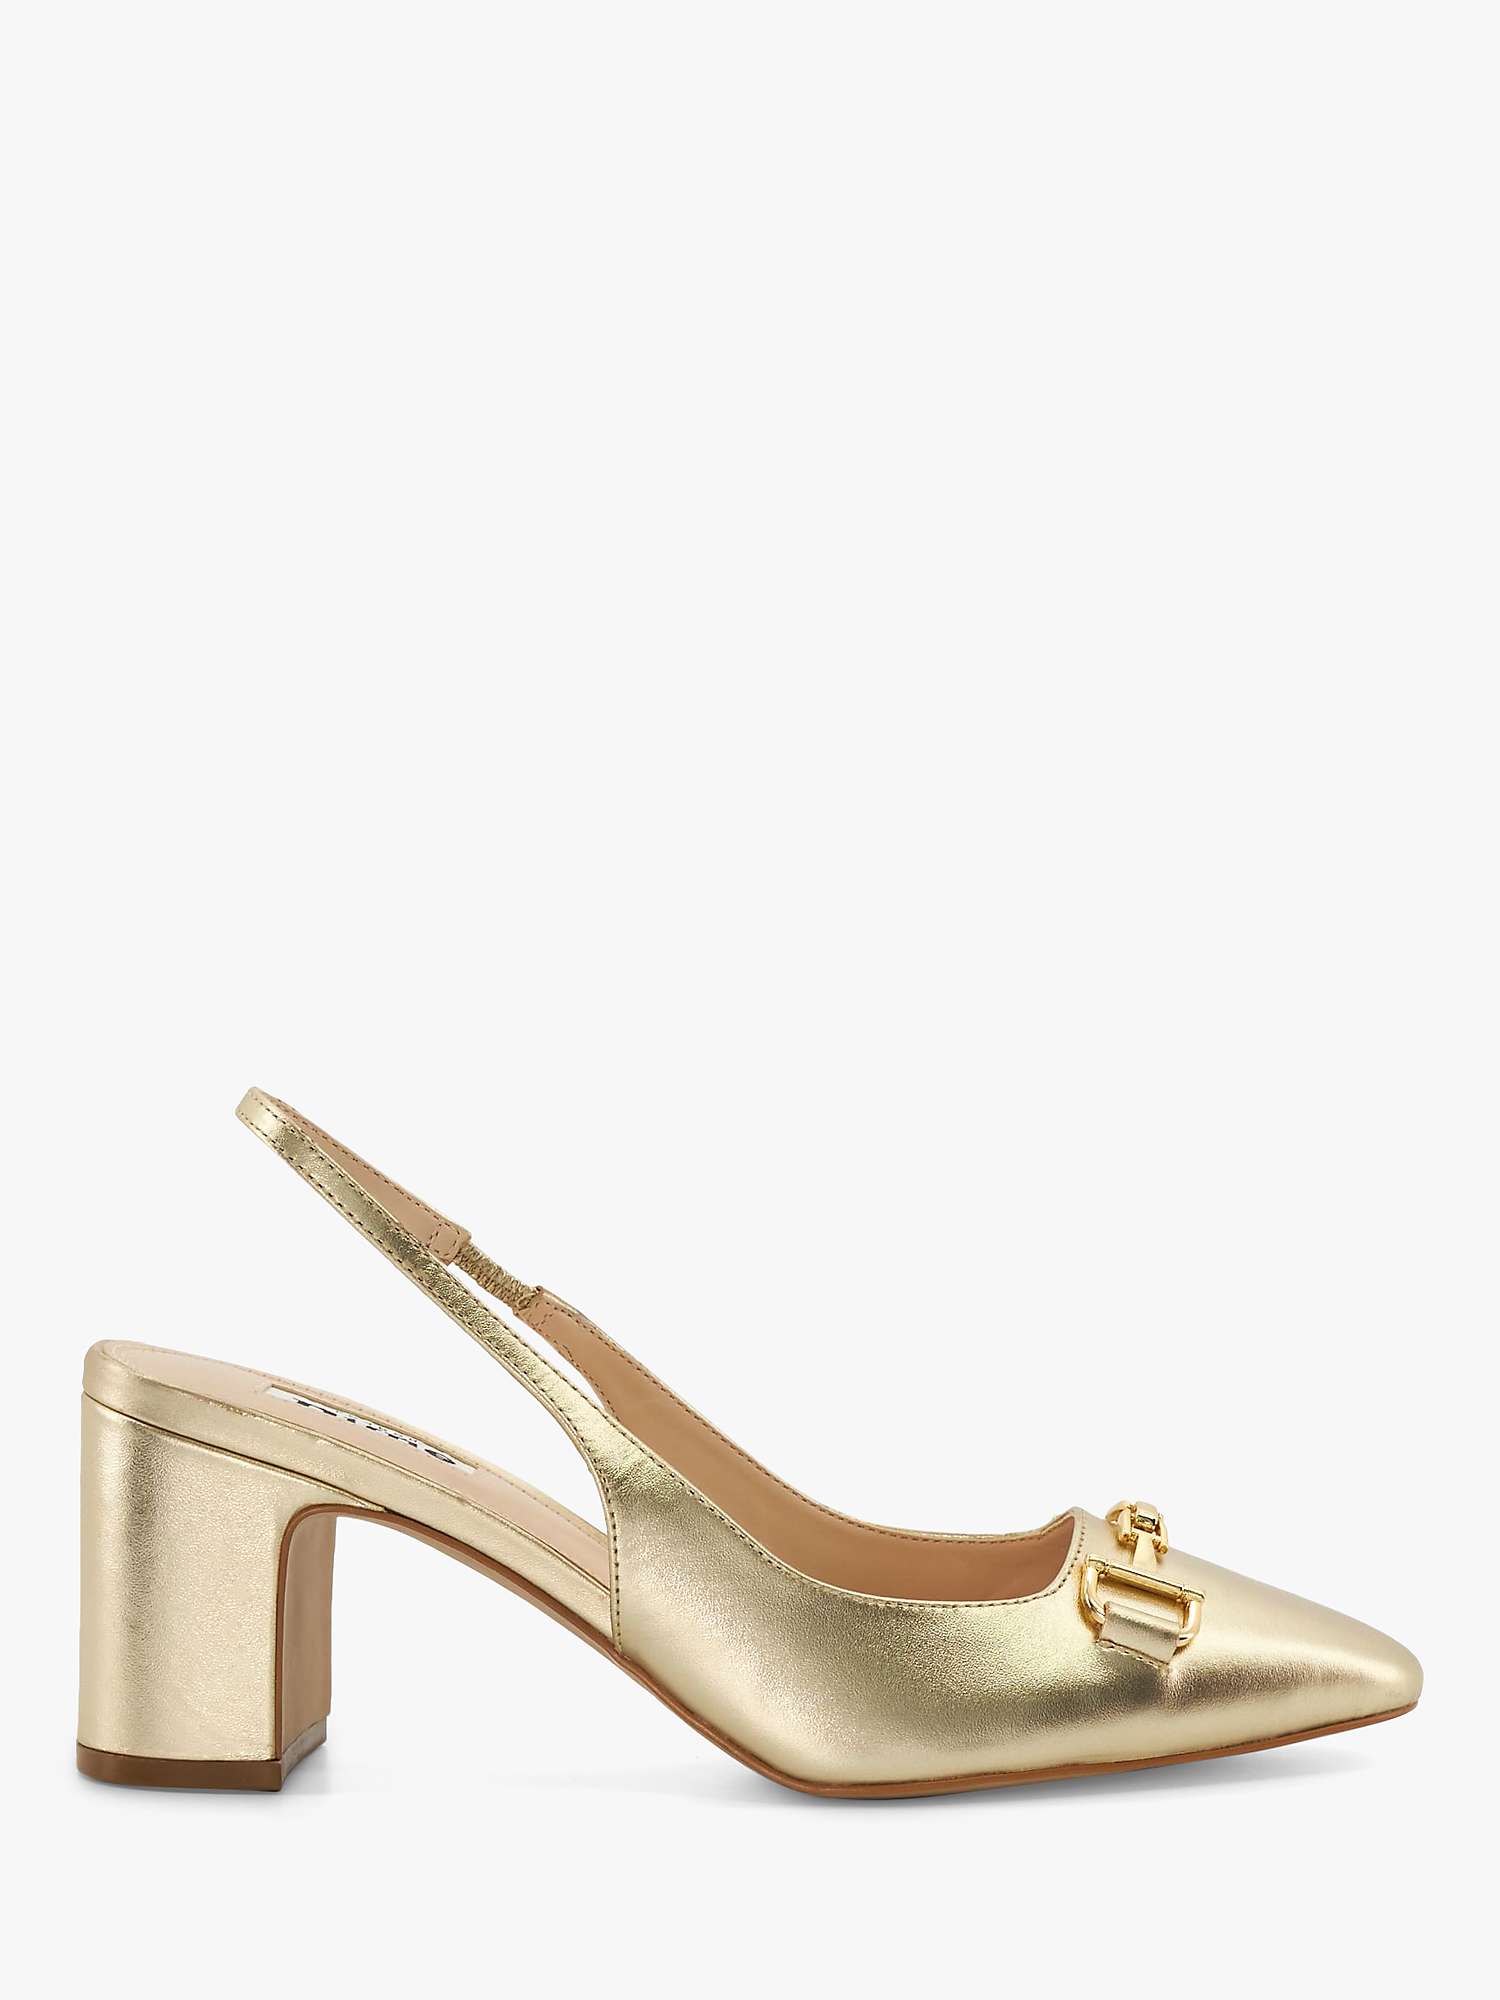 Buy Dune Detailed High Heel Leather Court Shoes Online at johnlewis.com